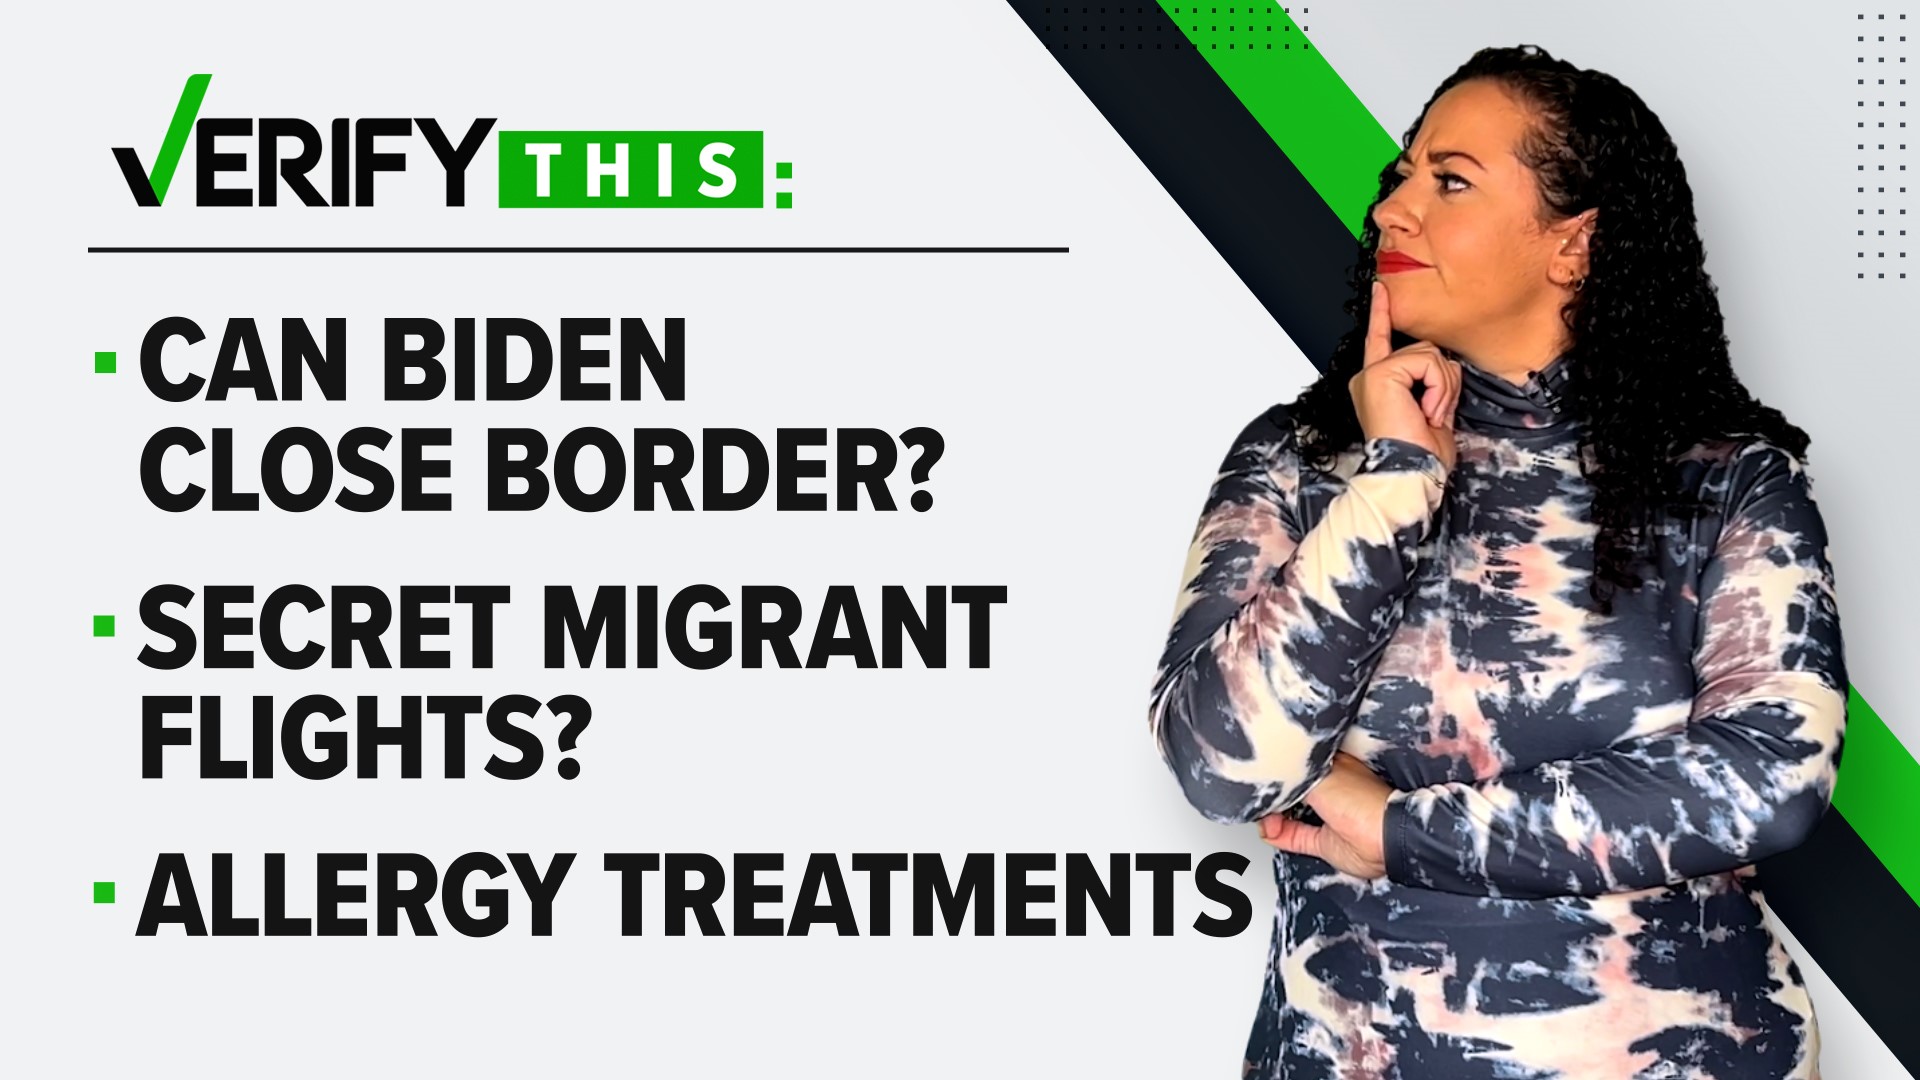 In this week's episode, Ariane Datil looks at claims that President Biden is secretly approving flights for migrants into the U.S.